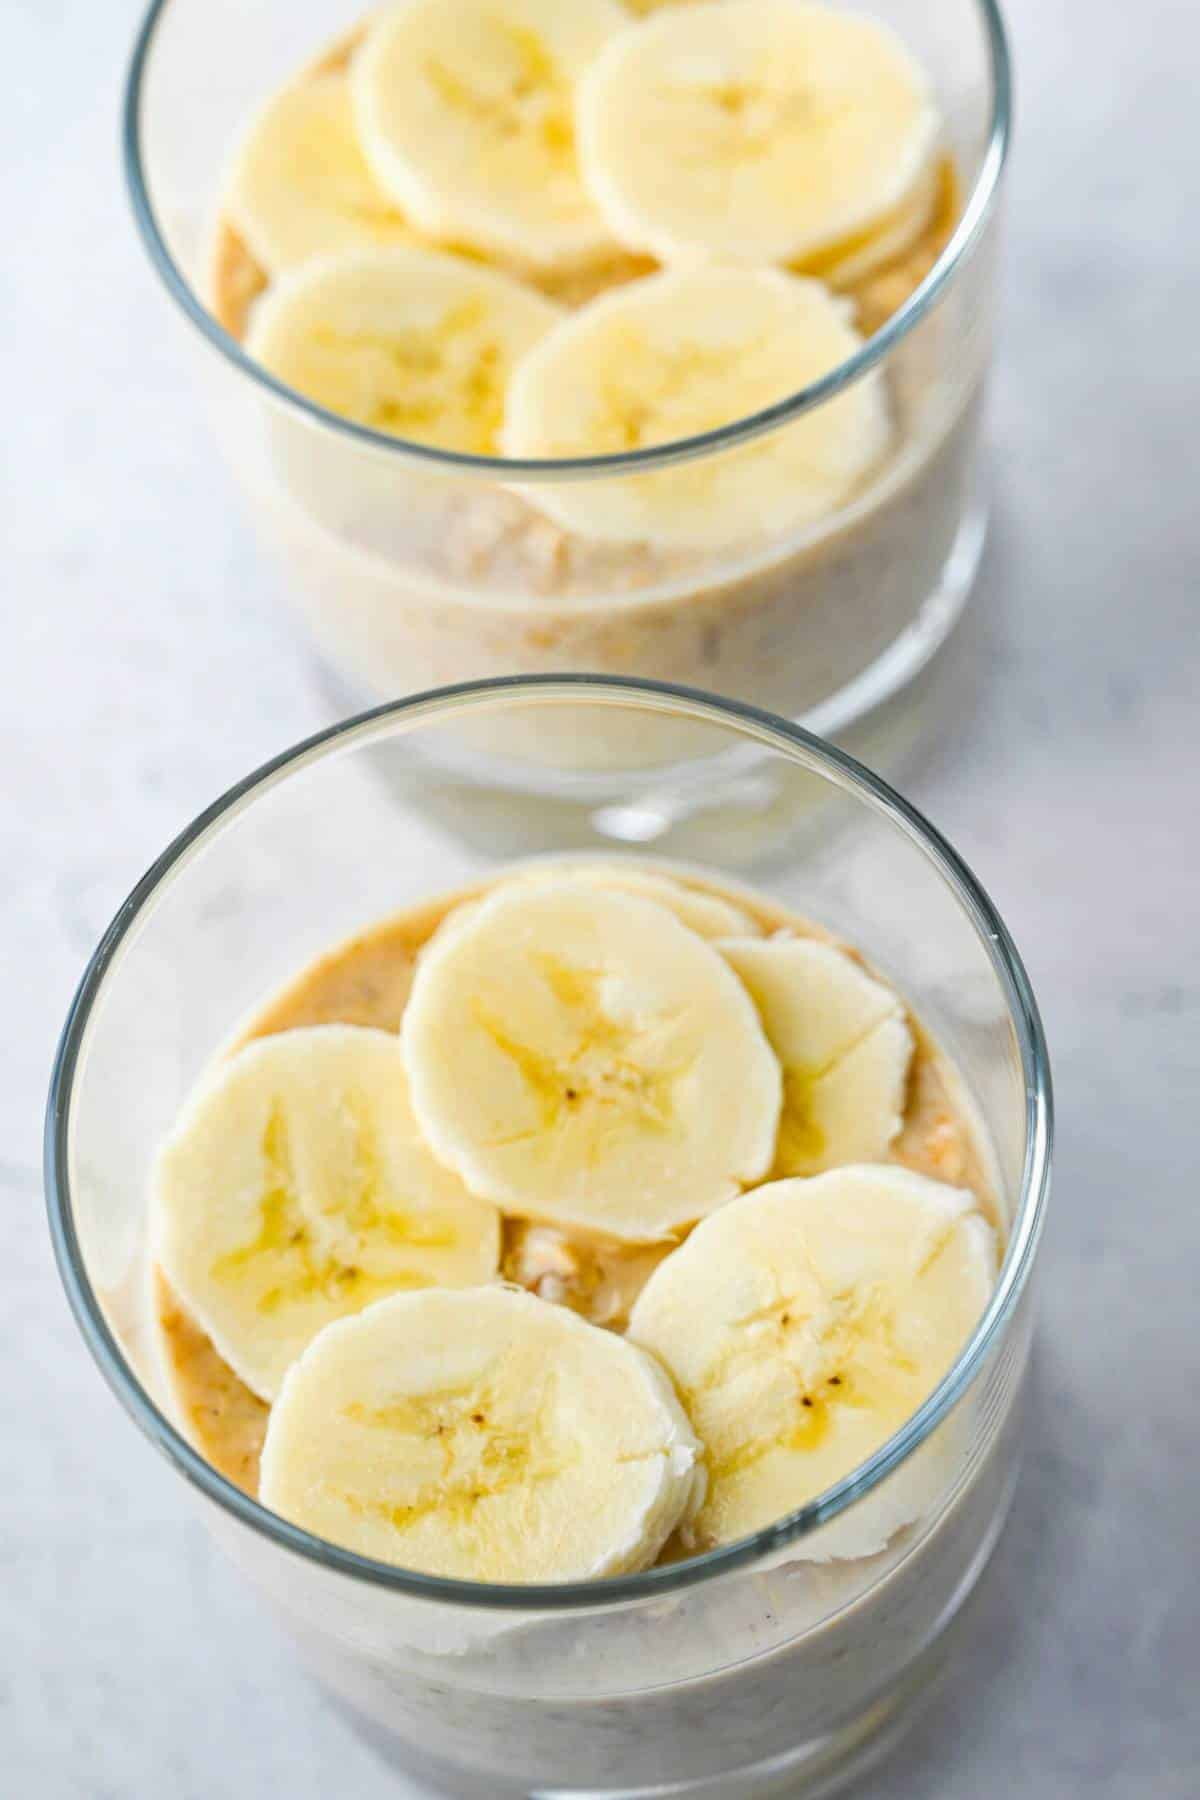 overnight oats in a low ball glass topped with sliced banana